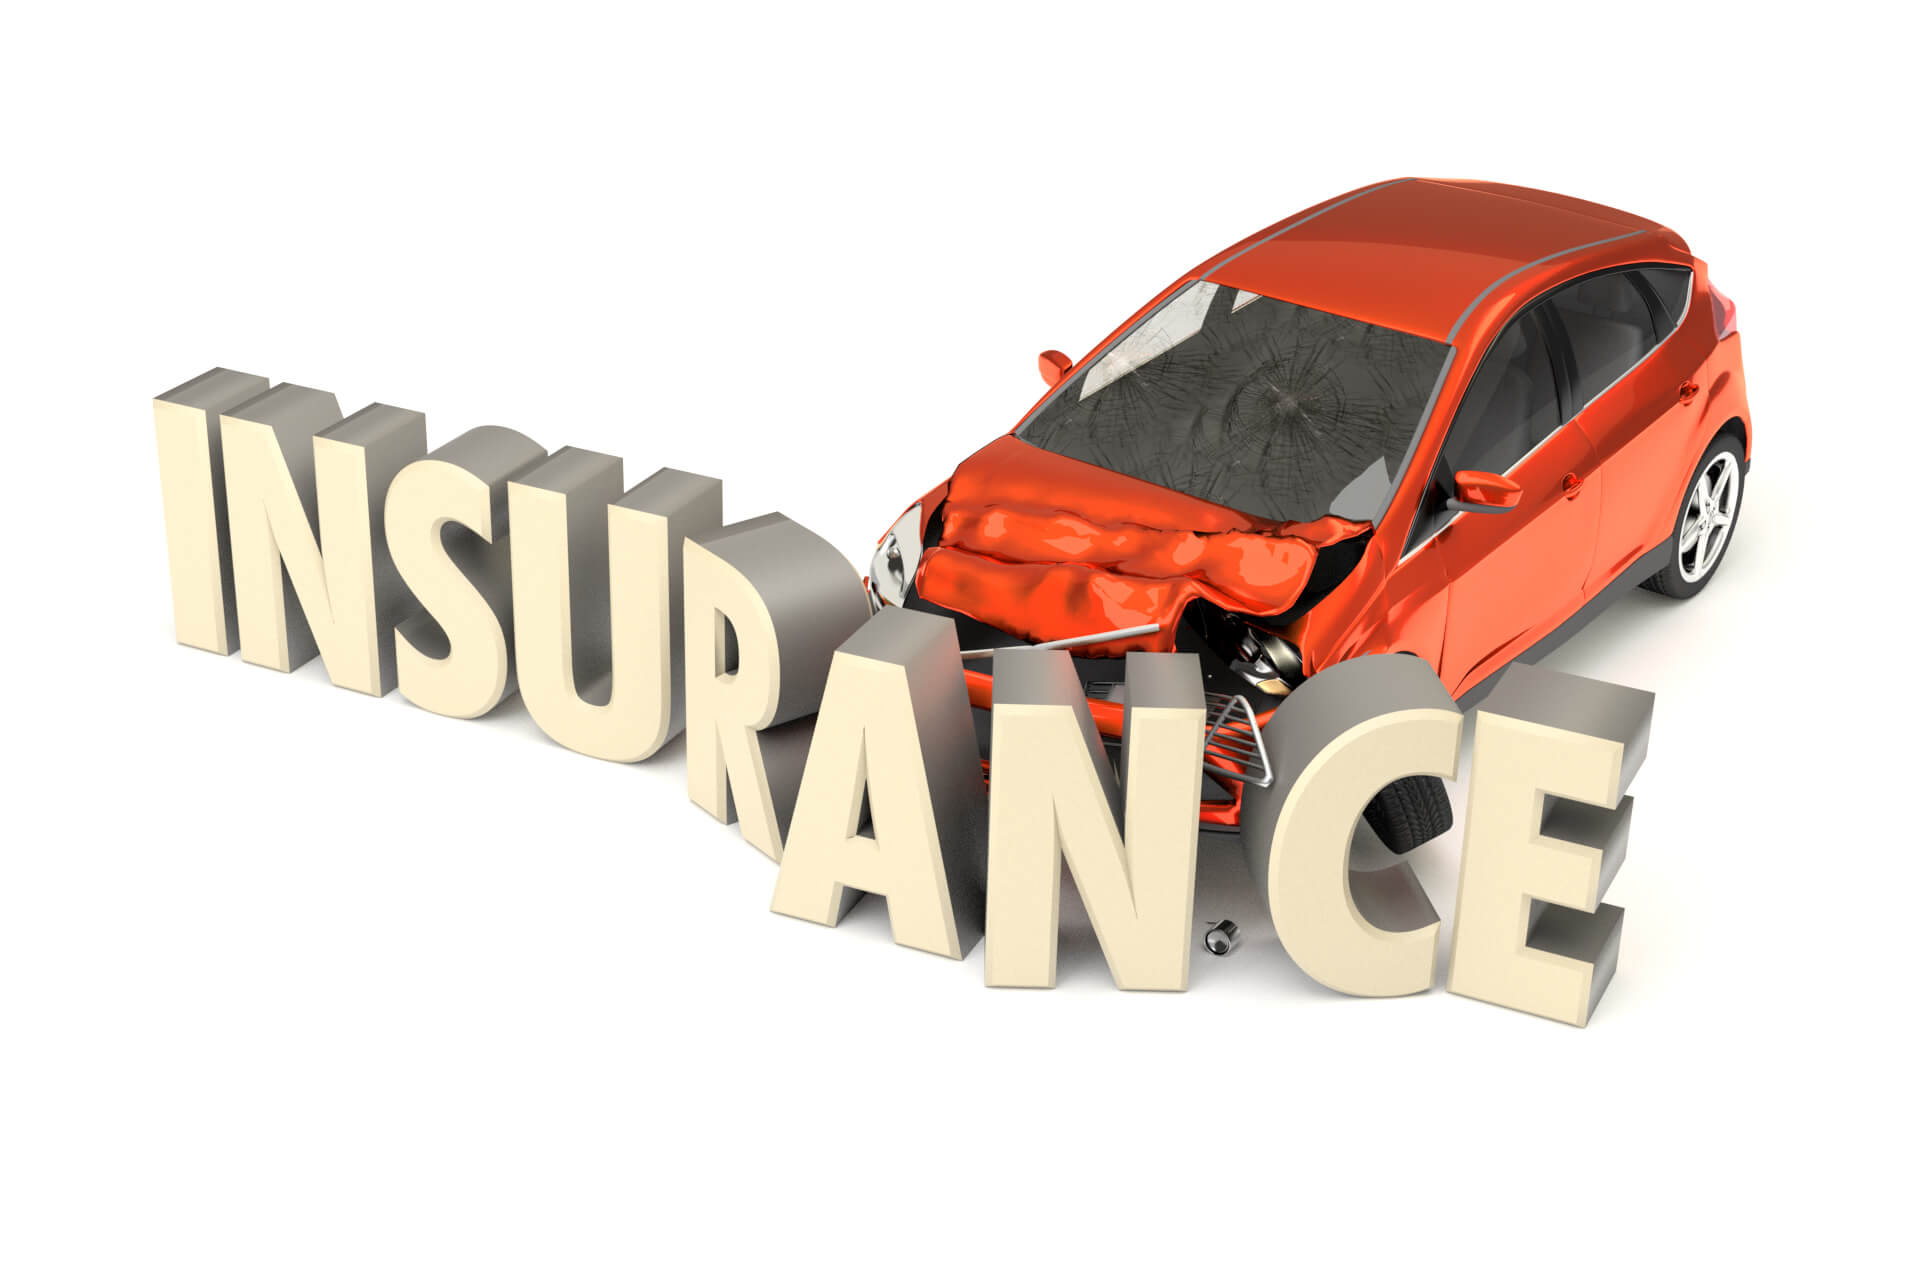 Car crashed into insurance letters free image download